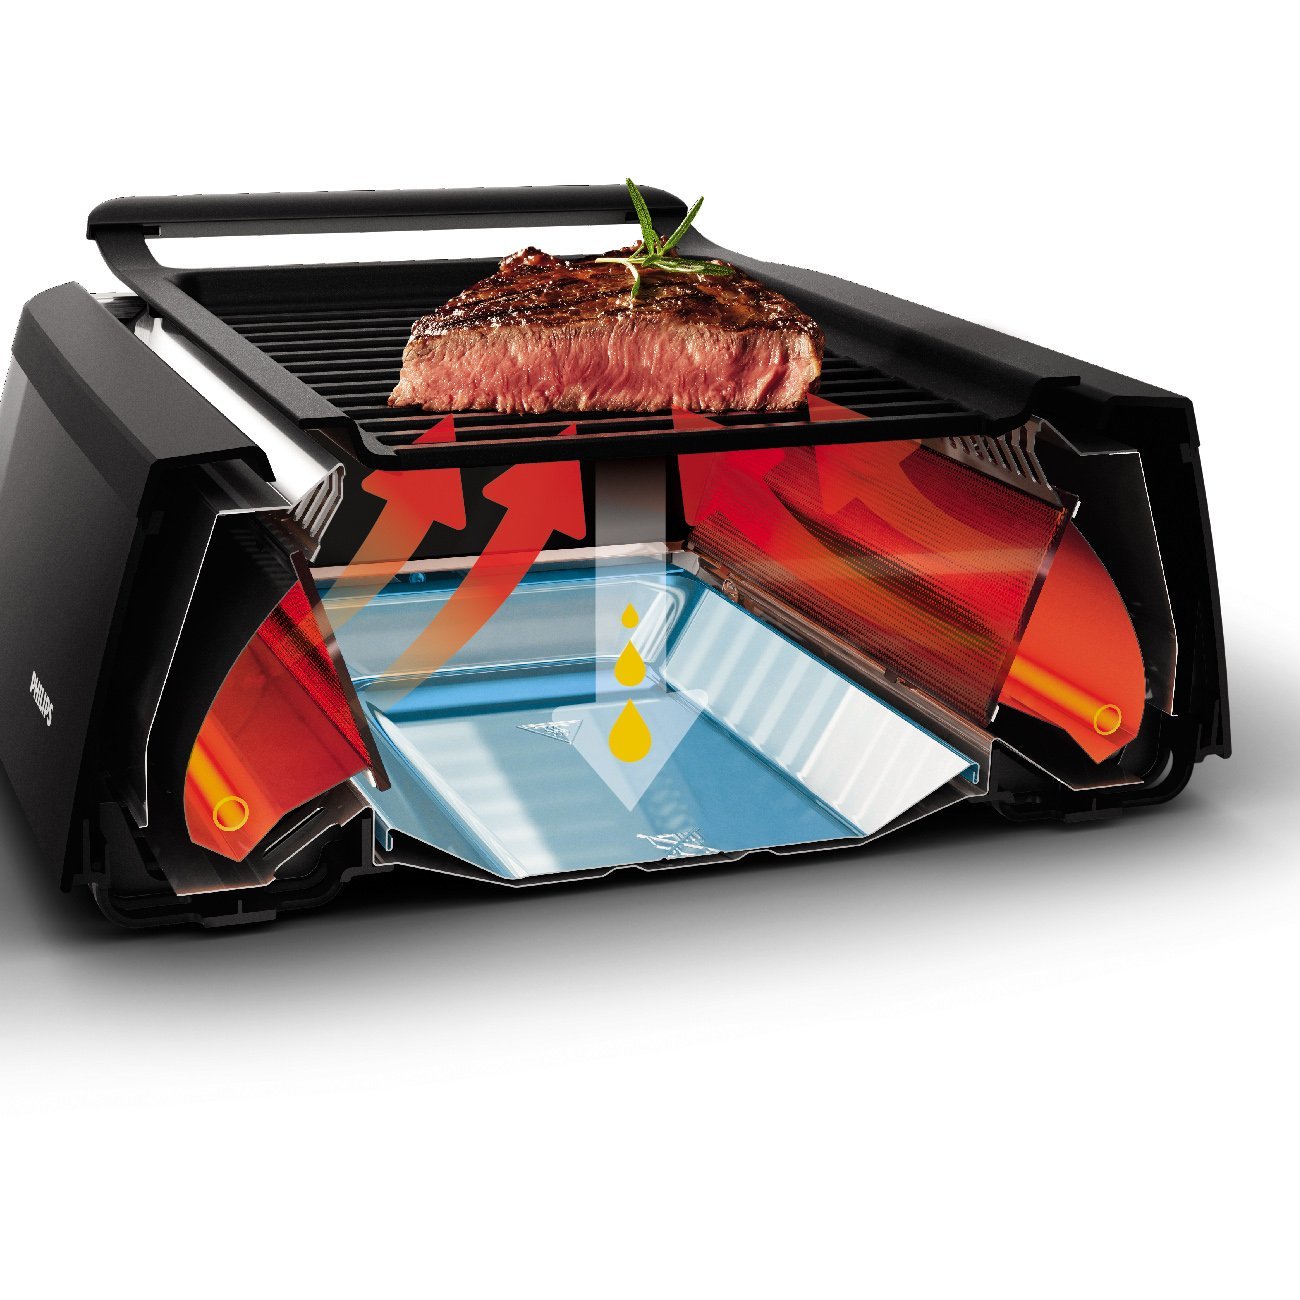 Philips HD6371-94 Indoor Grill review